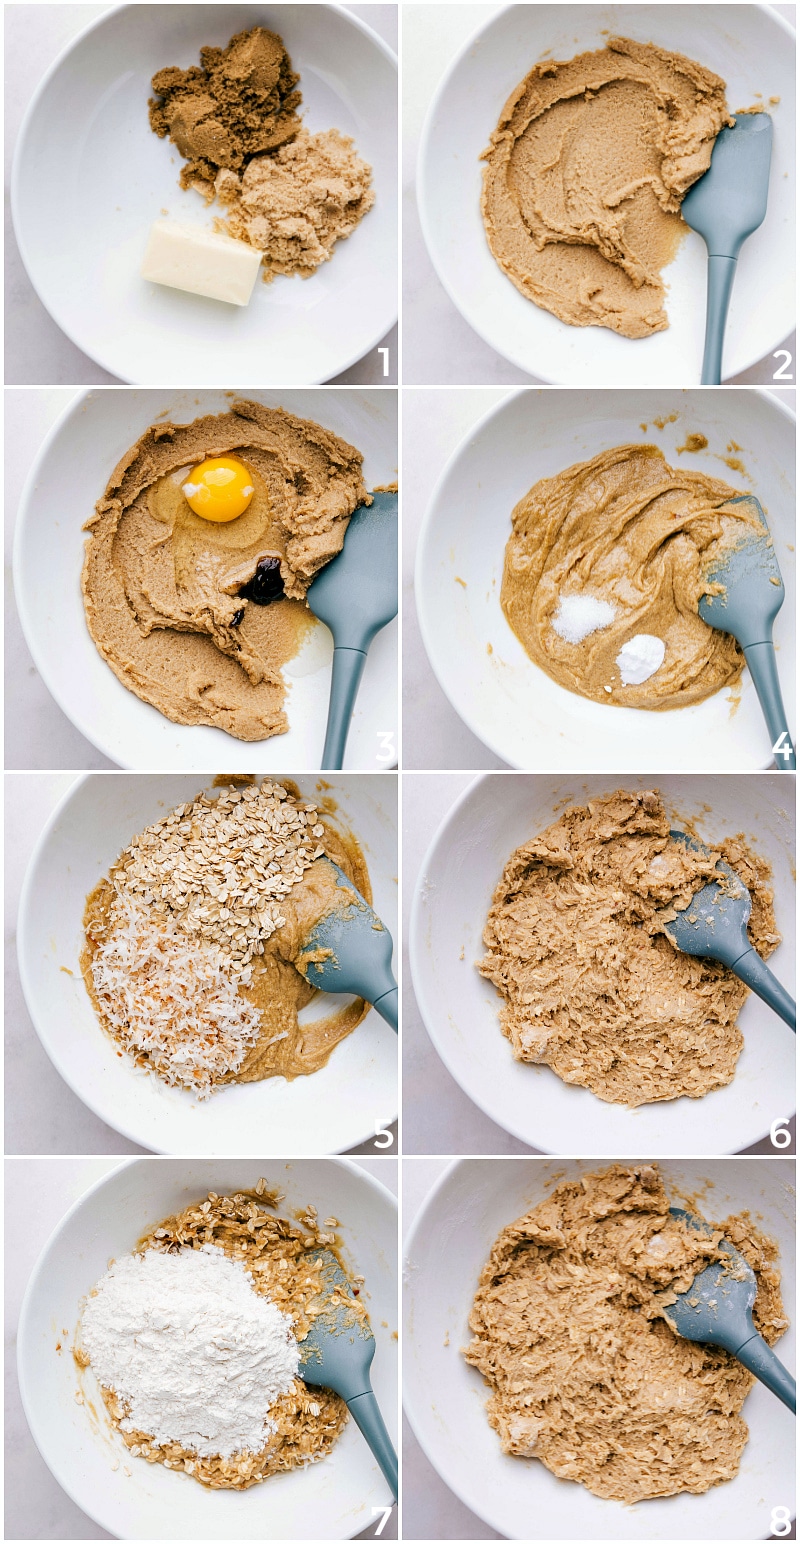 Process shots-- images of Oatmeal Cranberry Cookies being made: combining ingredients in various stages of the process.